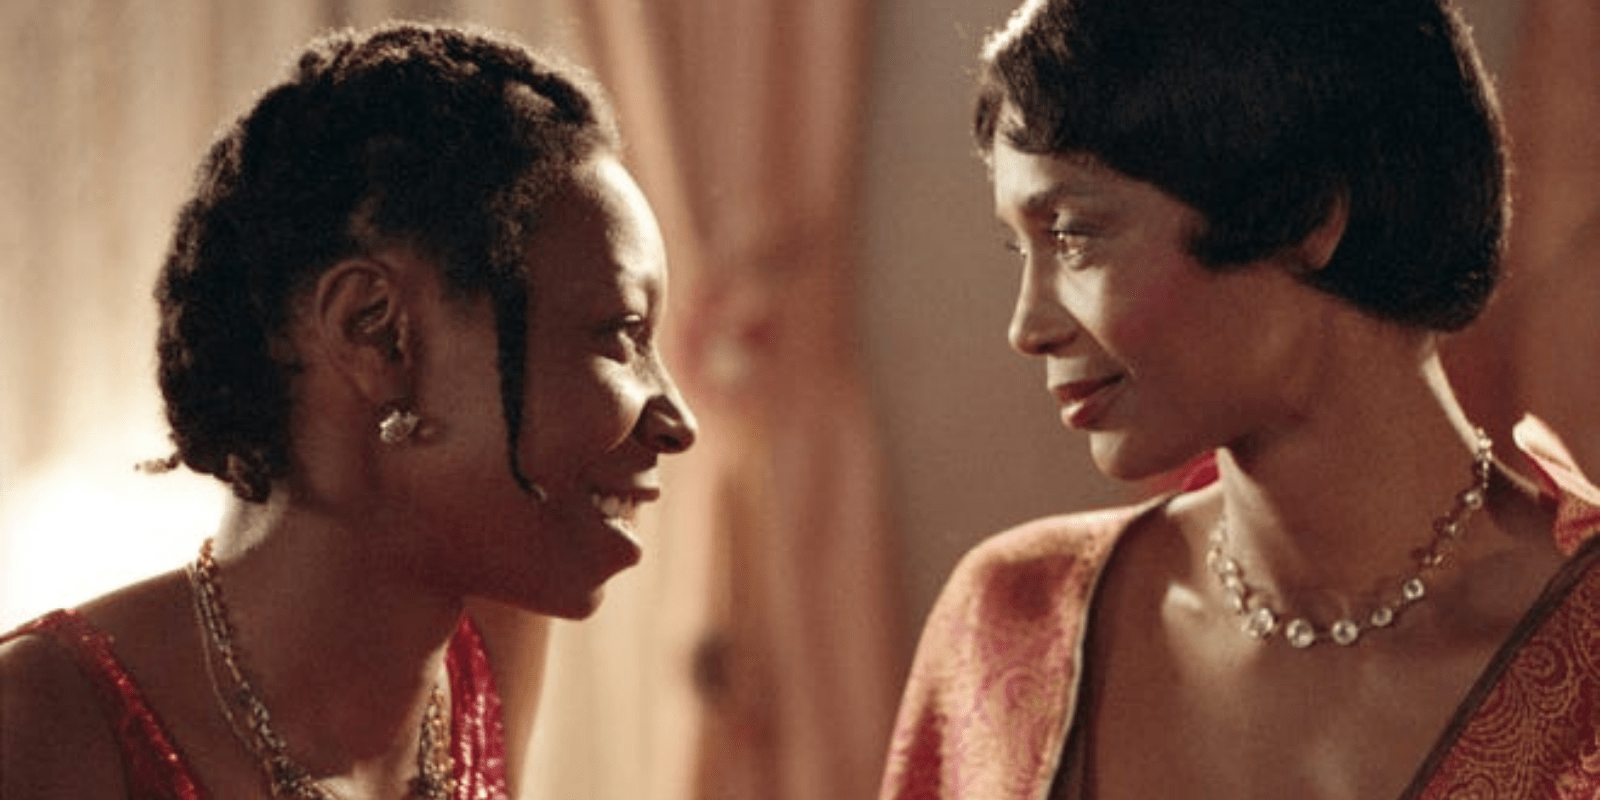 Will "The Color Purple" Get Black Queerness Right This Time?